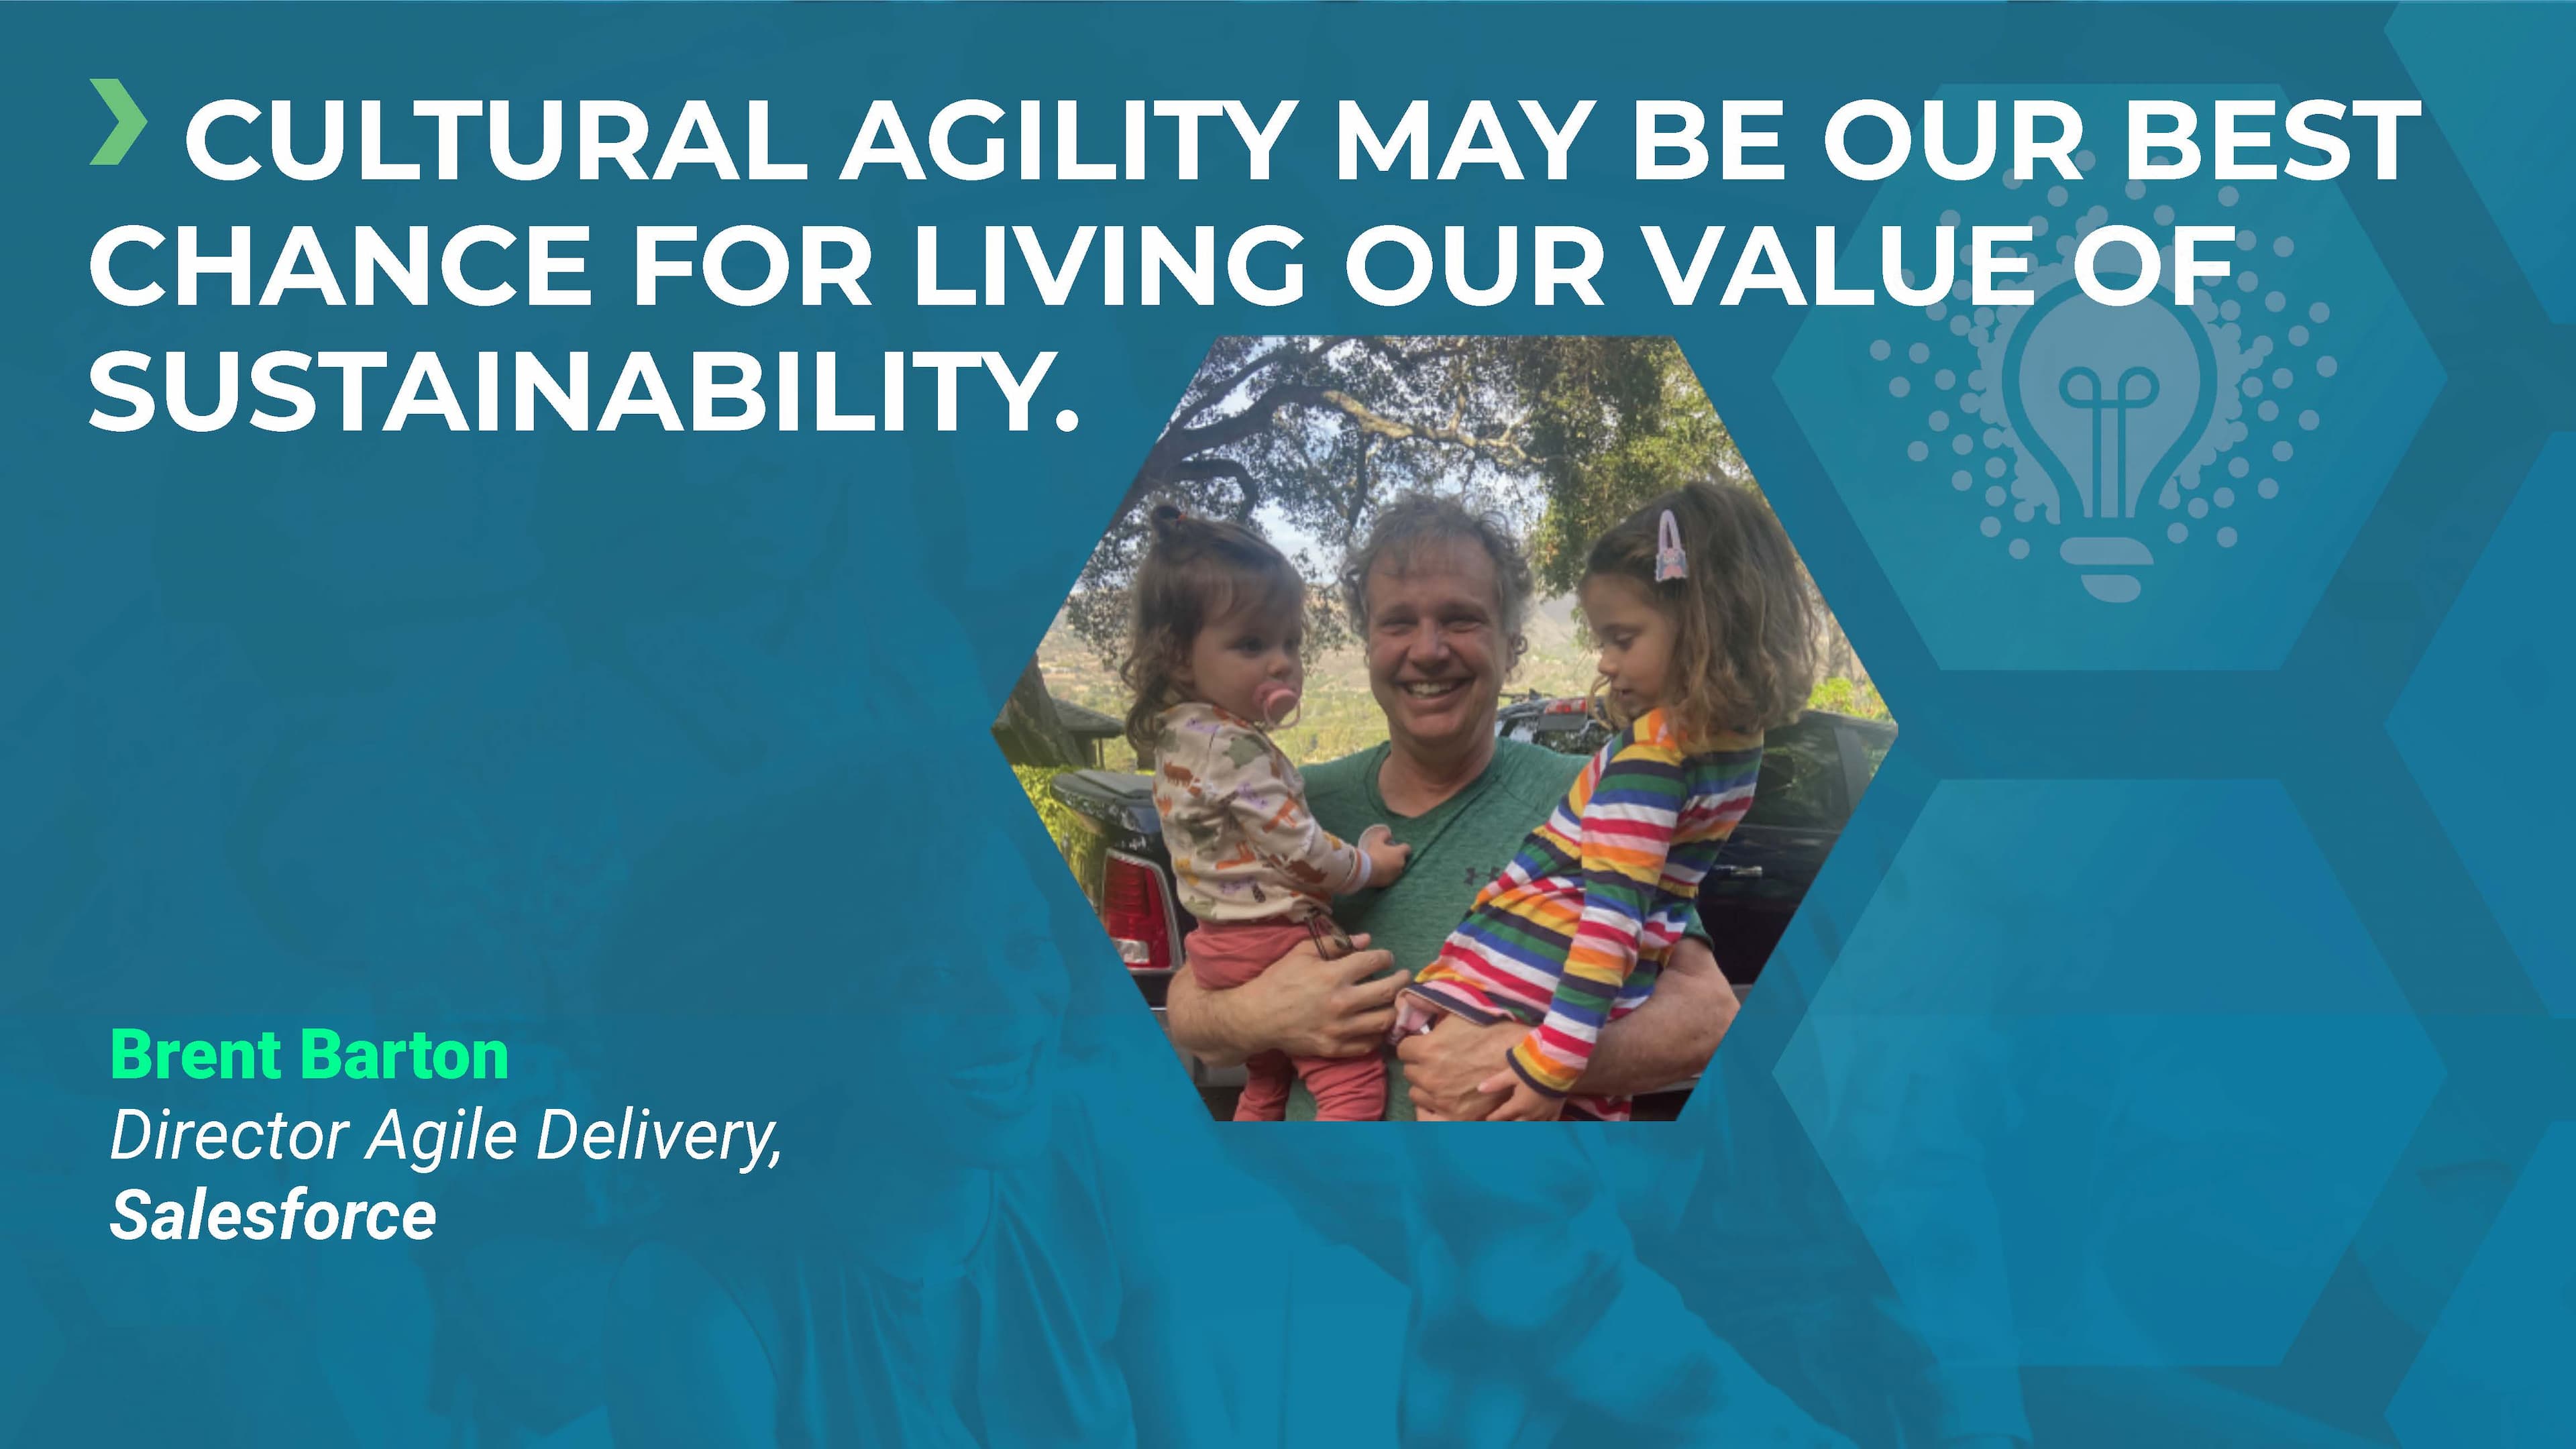 Cultural Agility May Be Our Best Chance for Living Our Value of Sustainability